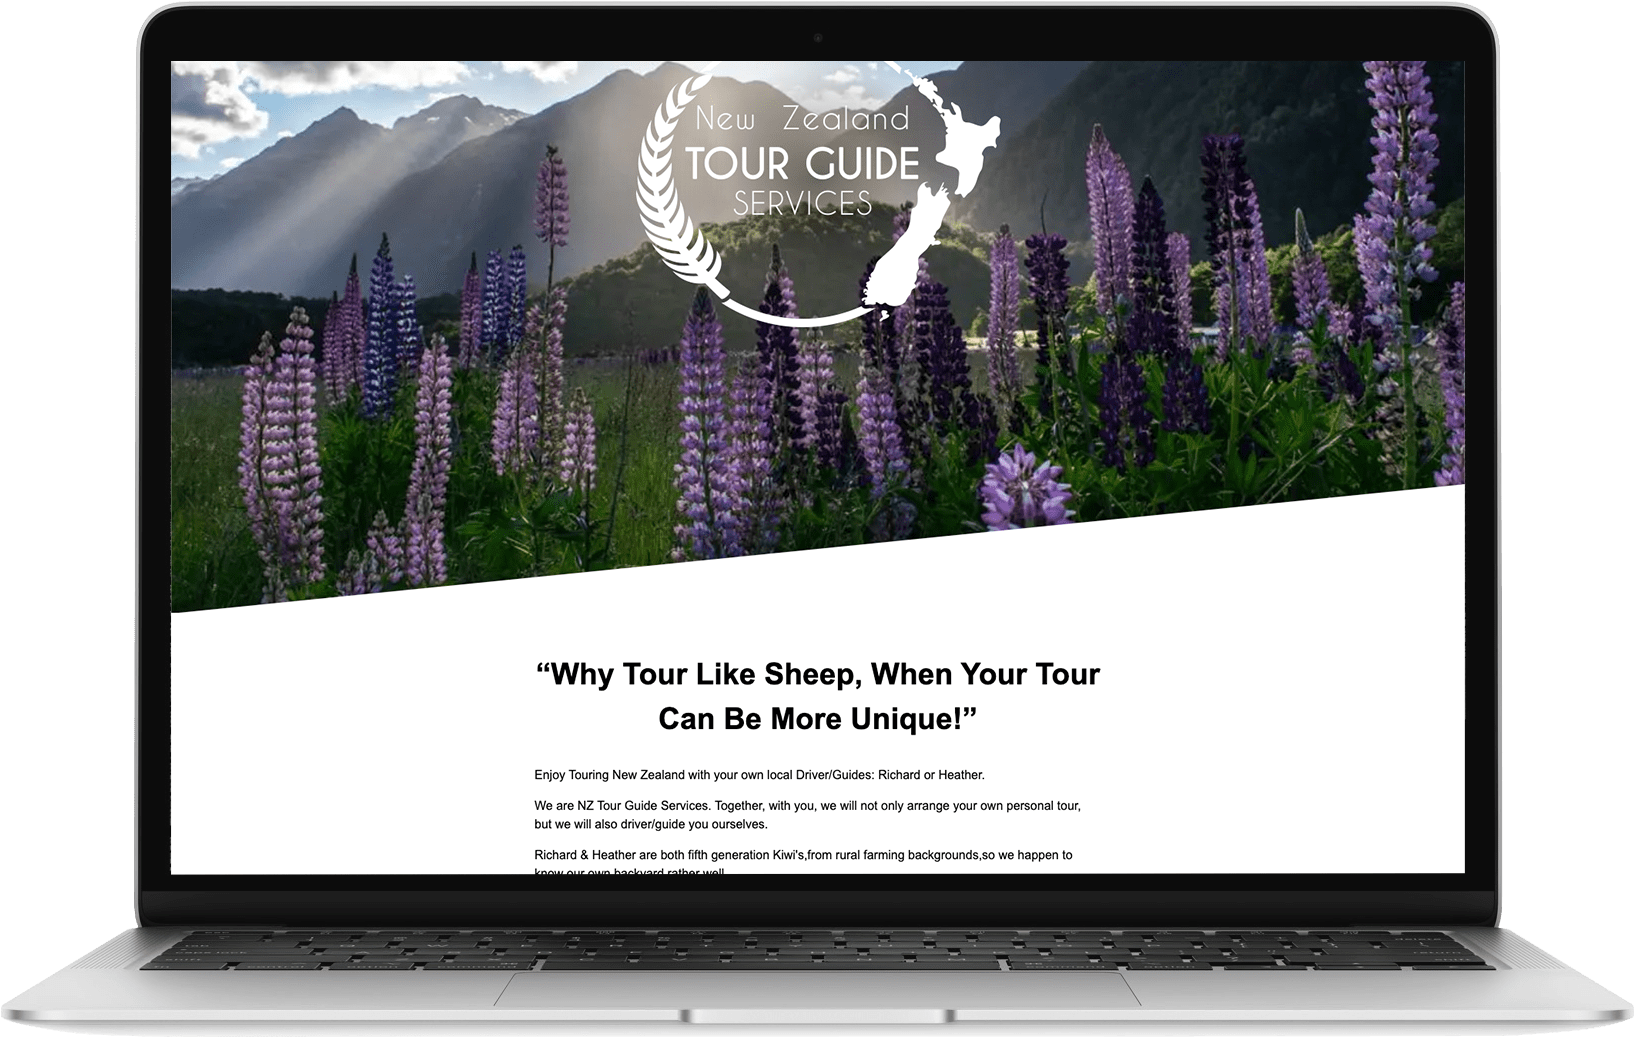 New Zealand tour guide services running on a MacBook Air